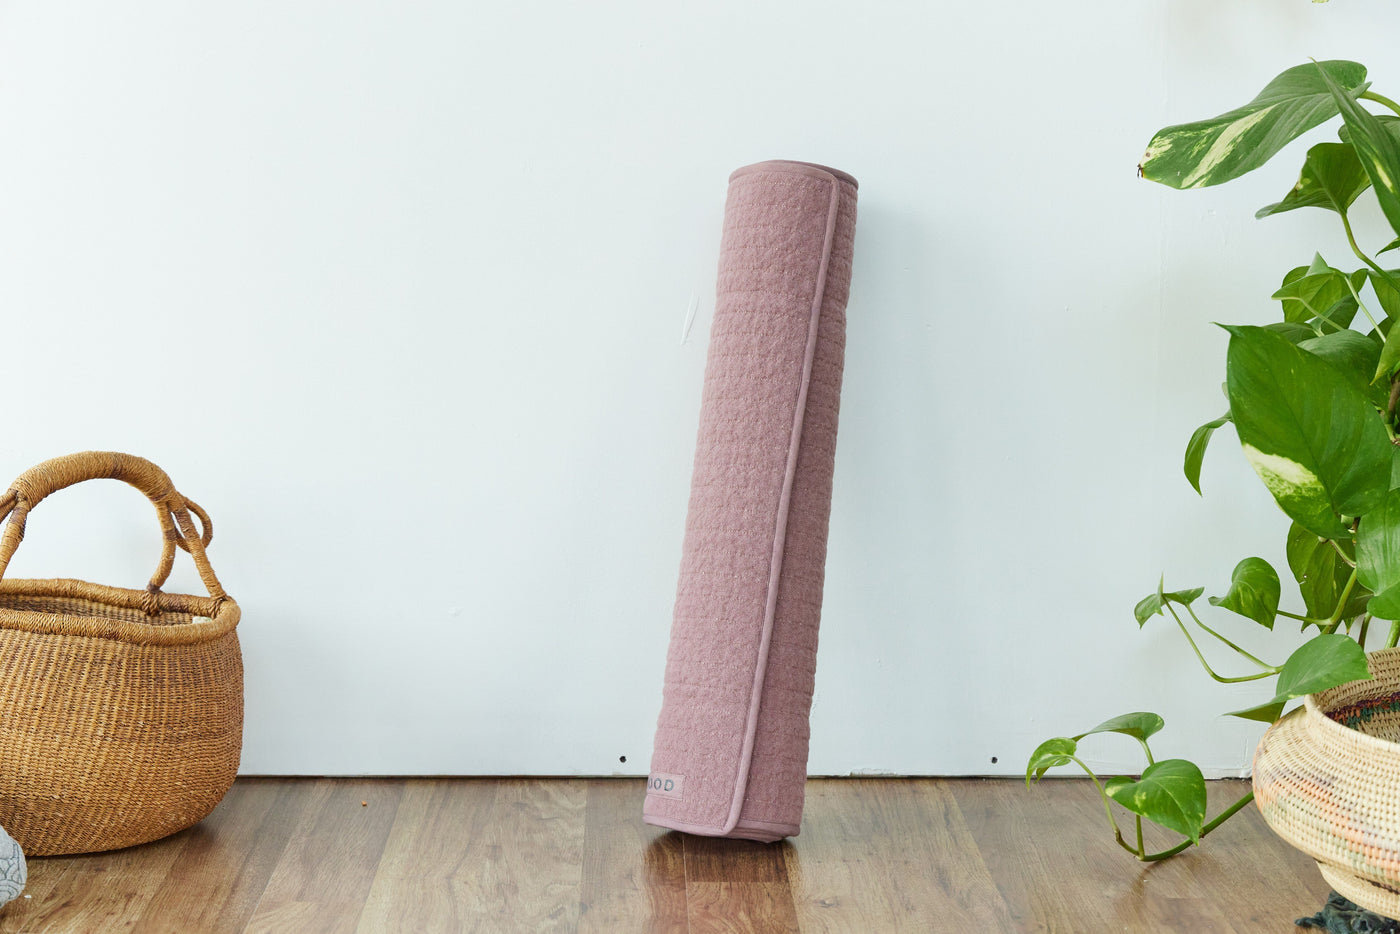 Lightweight & Eco-friendly Yoga Mat with Carrying Strap – Firefly